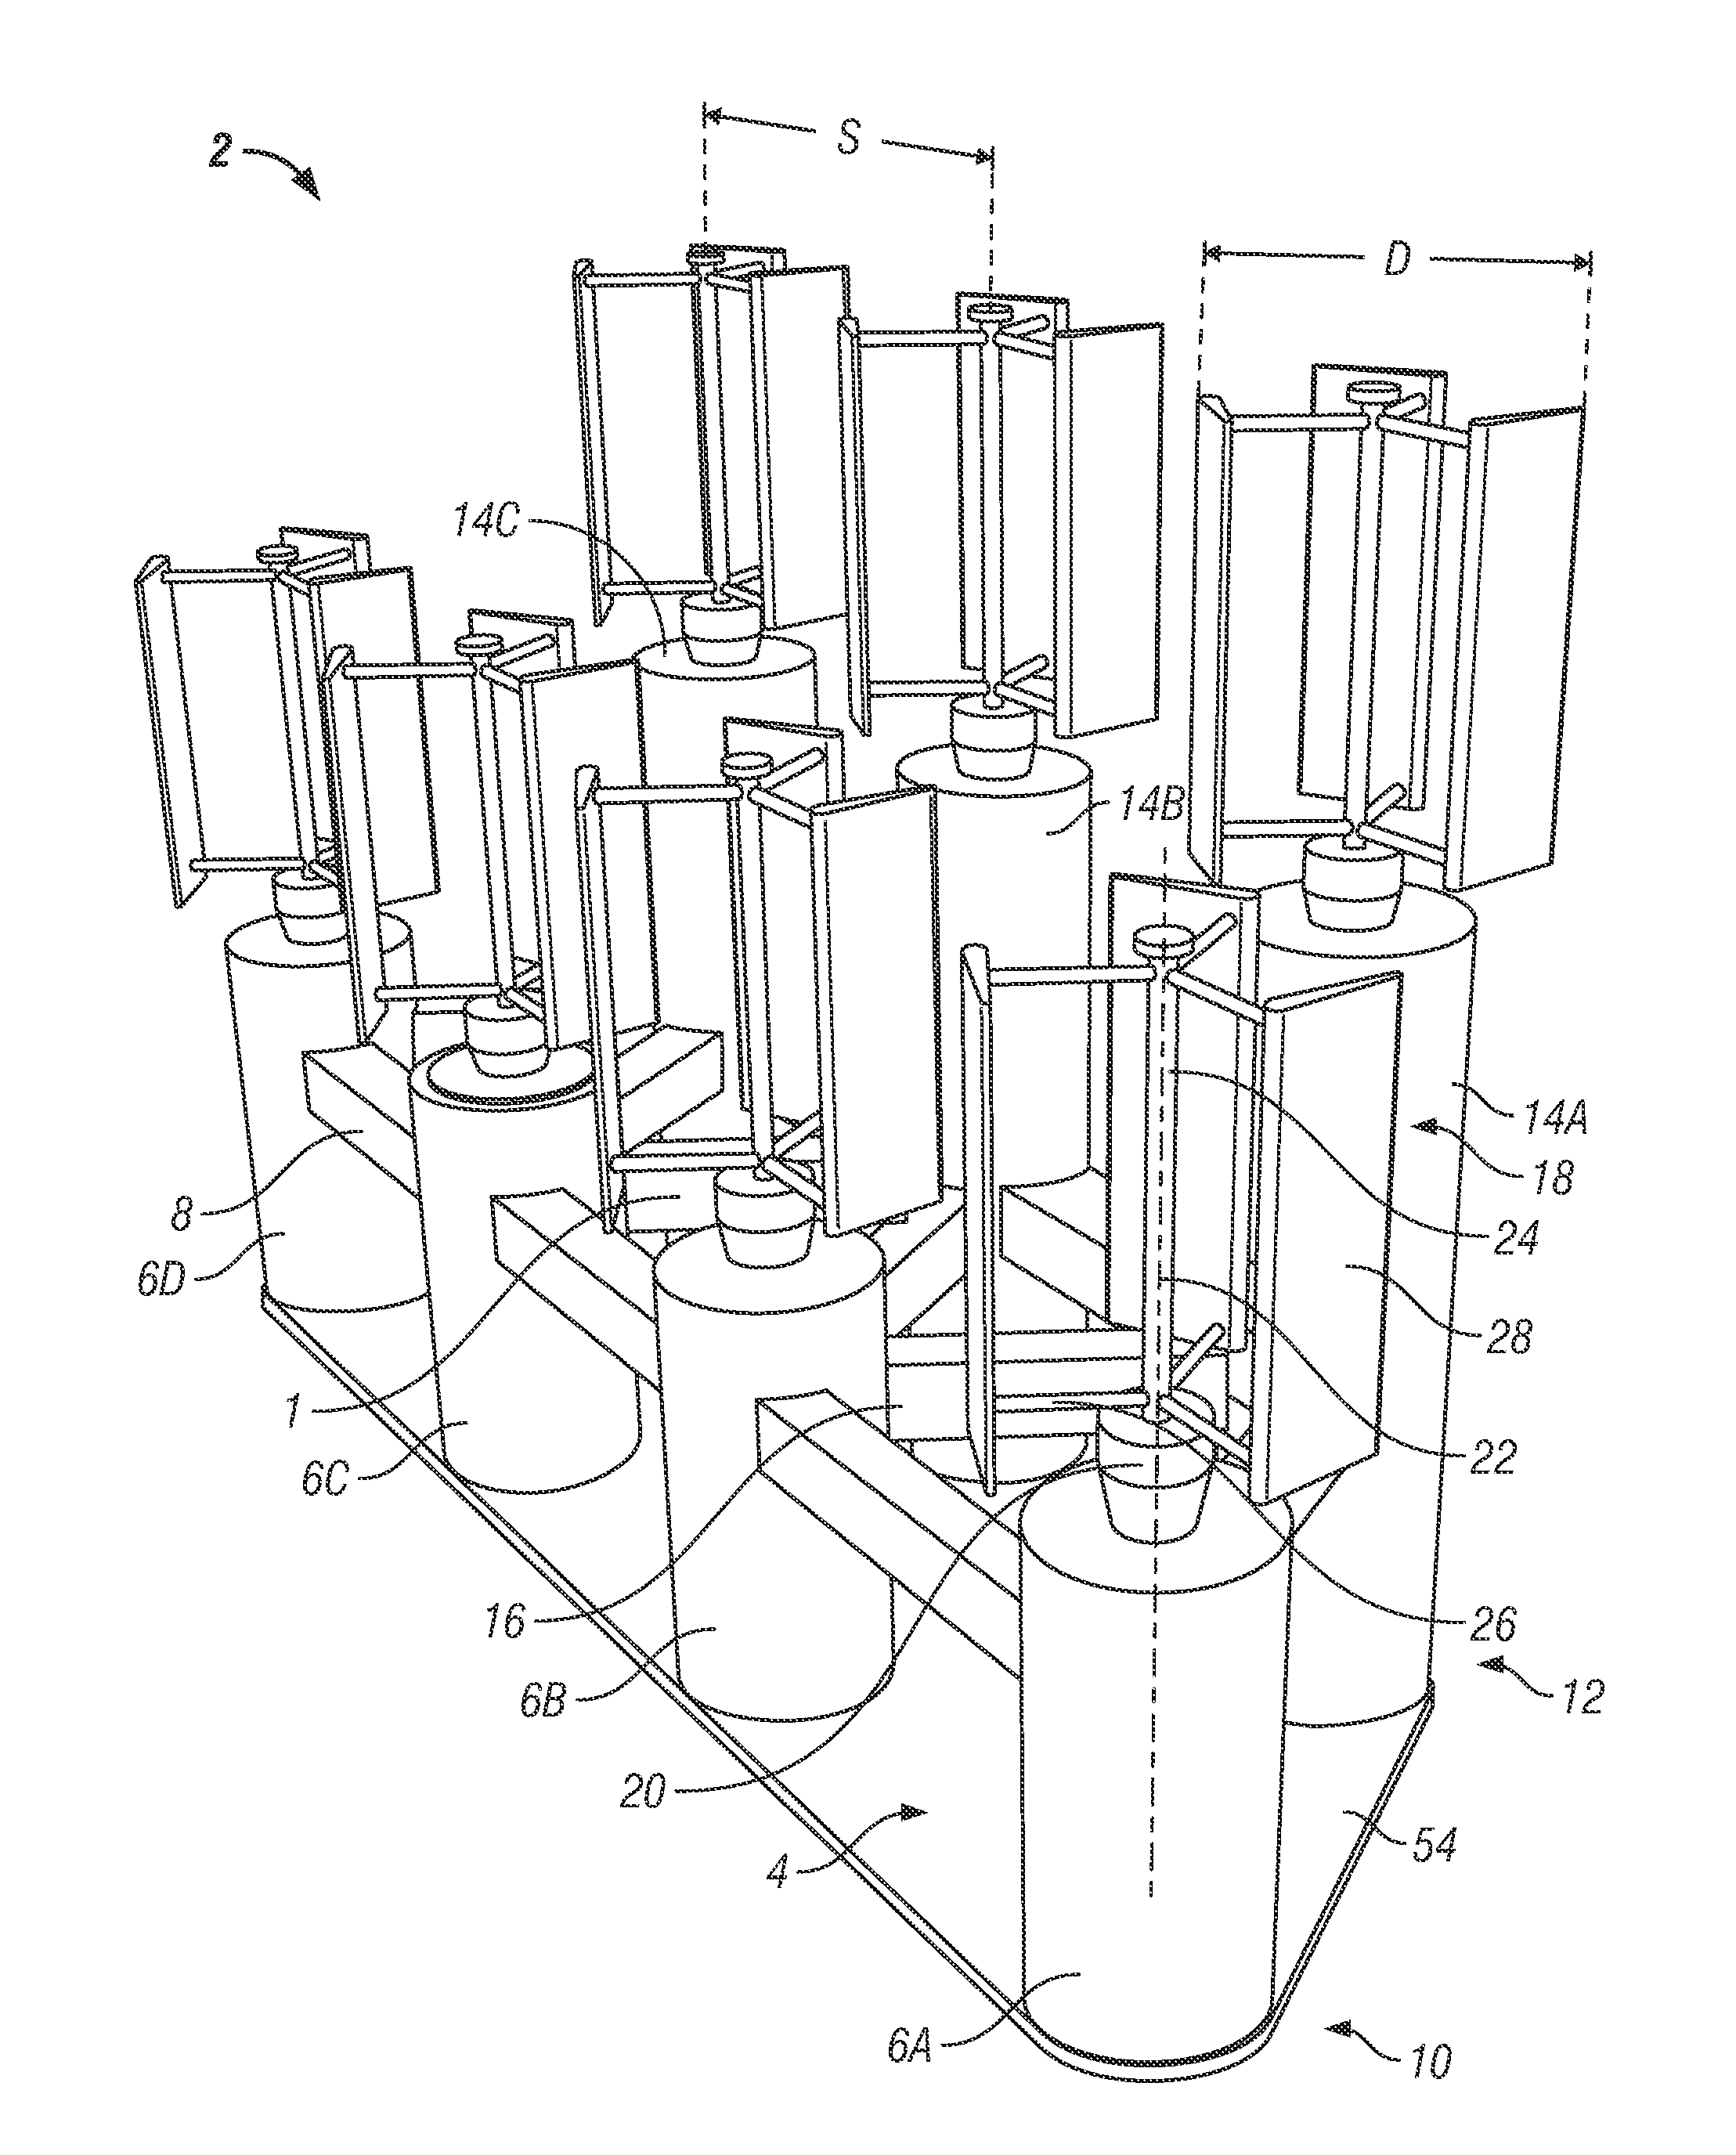 Floating vertical axis wind turbine module system and method